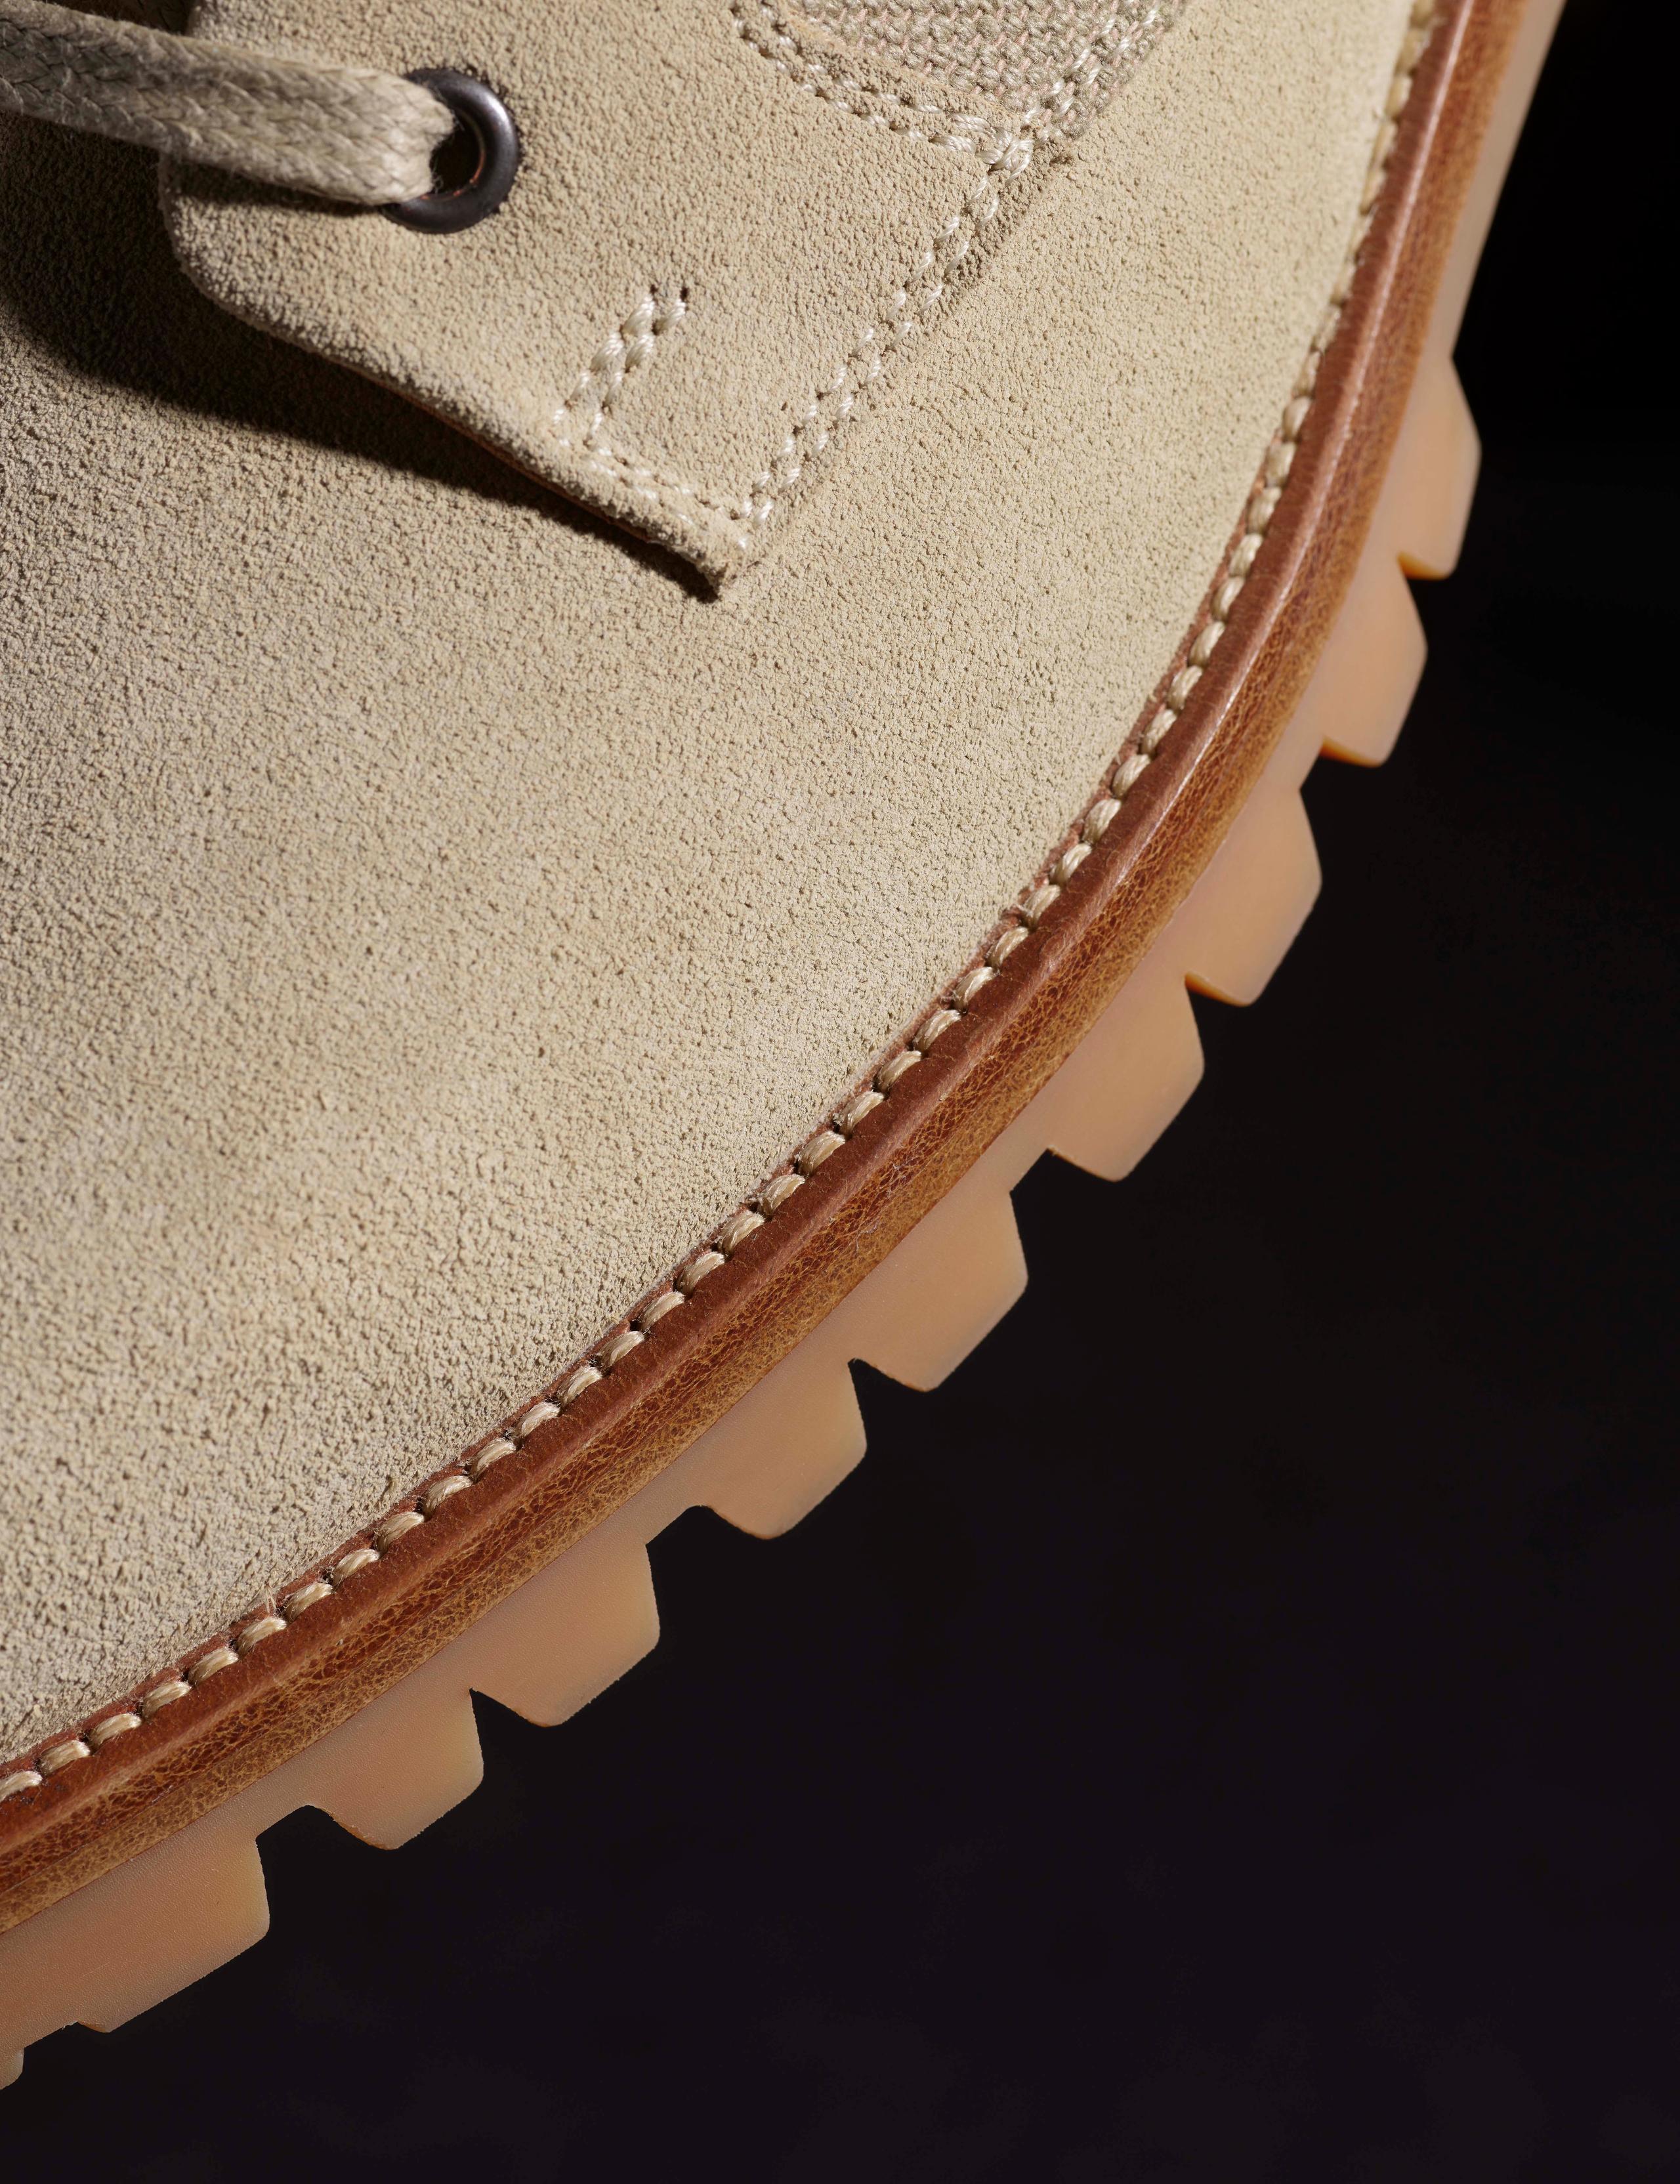 Detail view of Ojai Boot stacked leather heal and sole